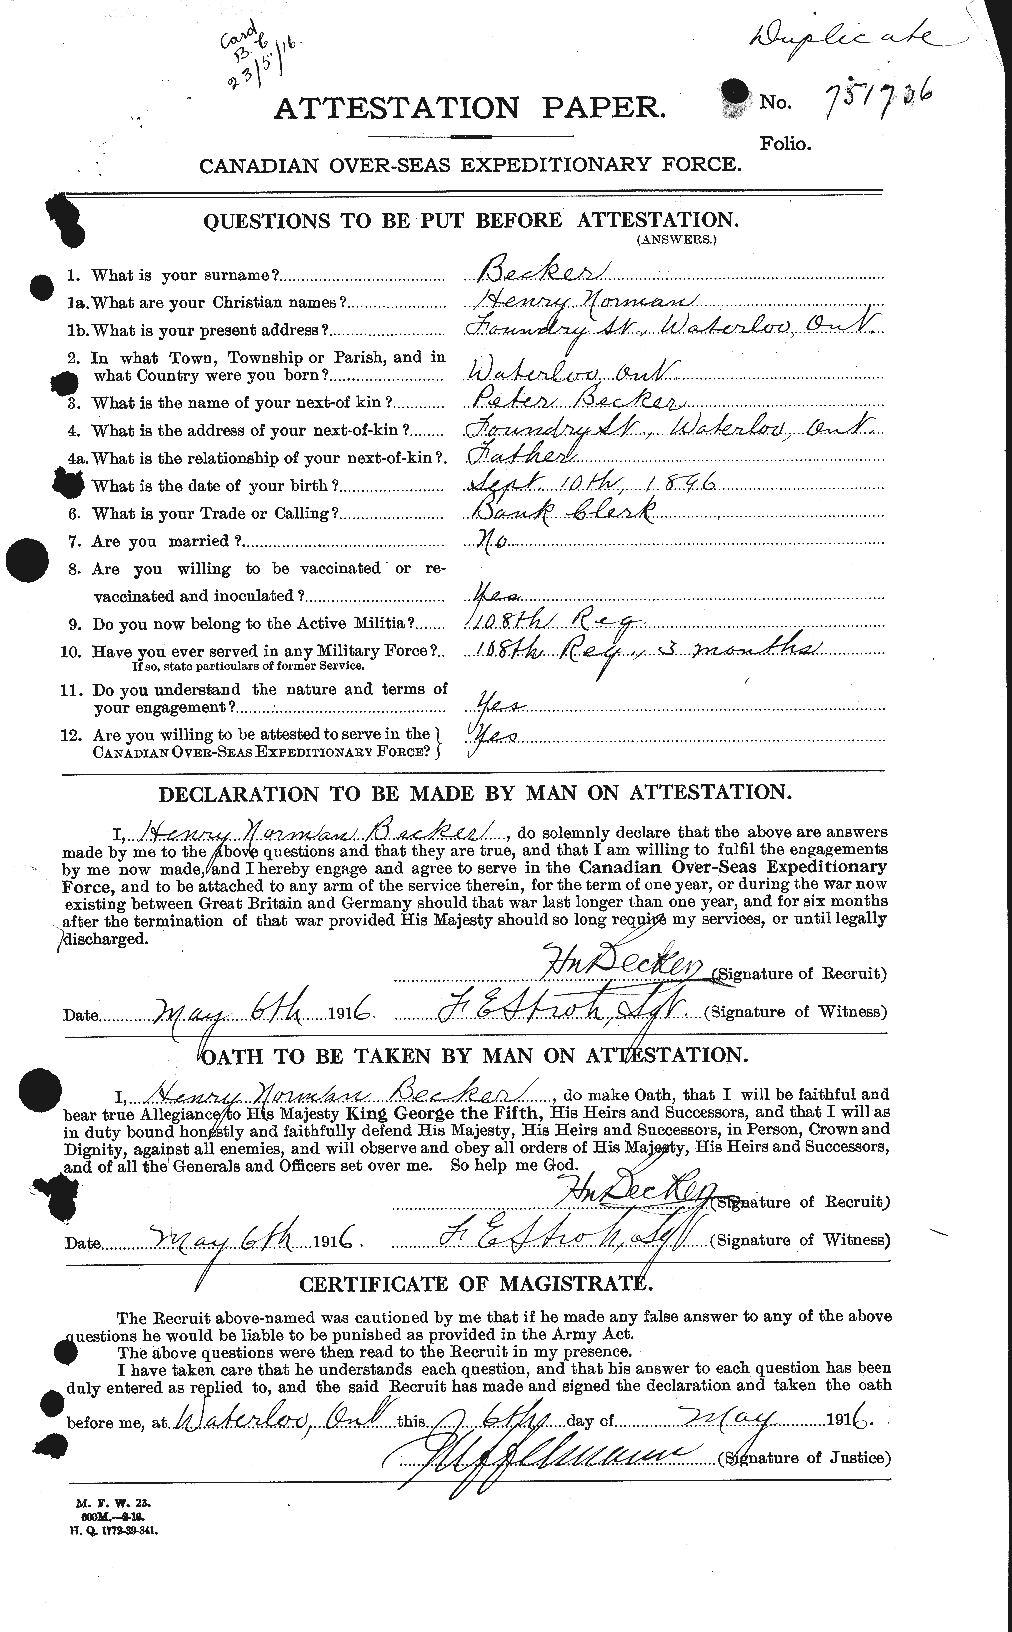 Personnel Records of the First World War - CEF 232288a